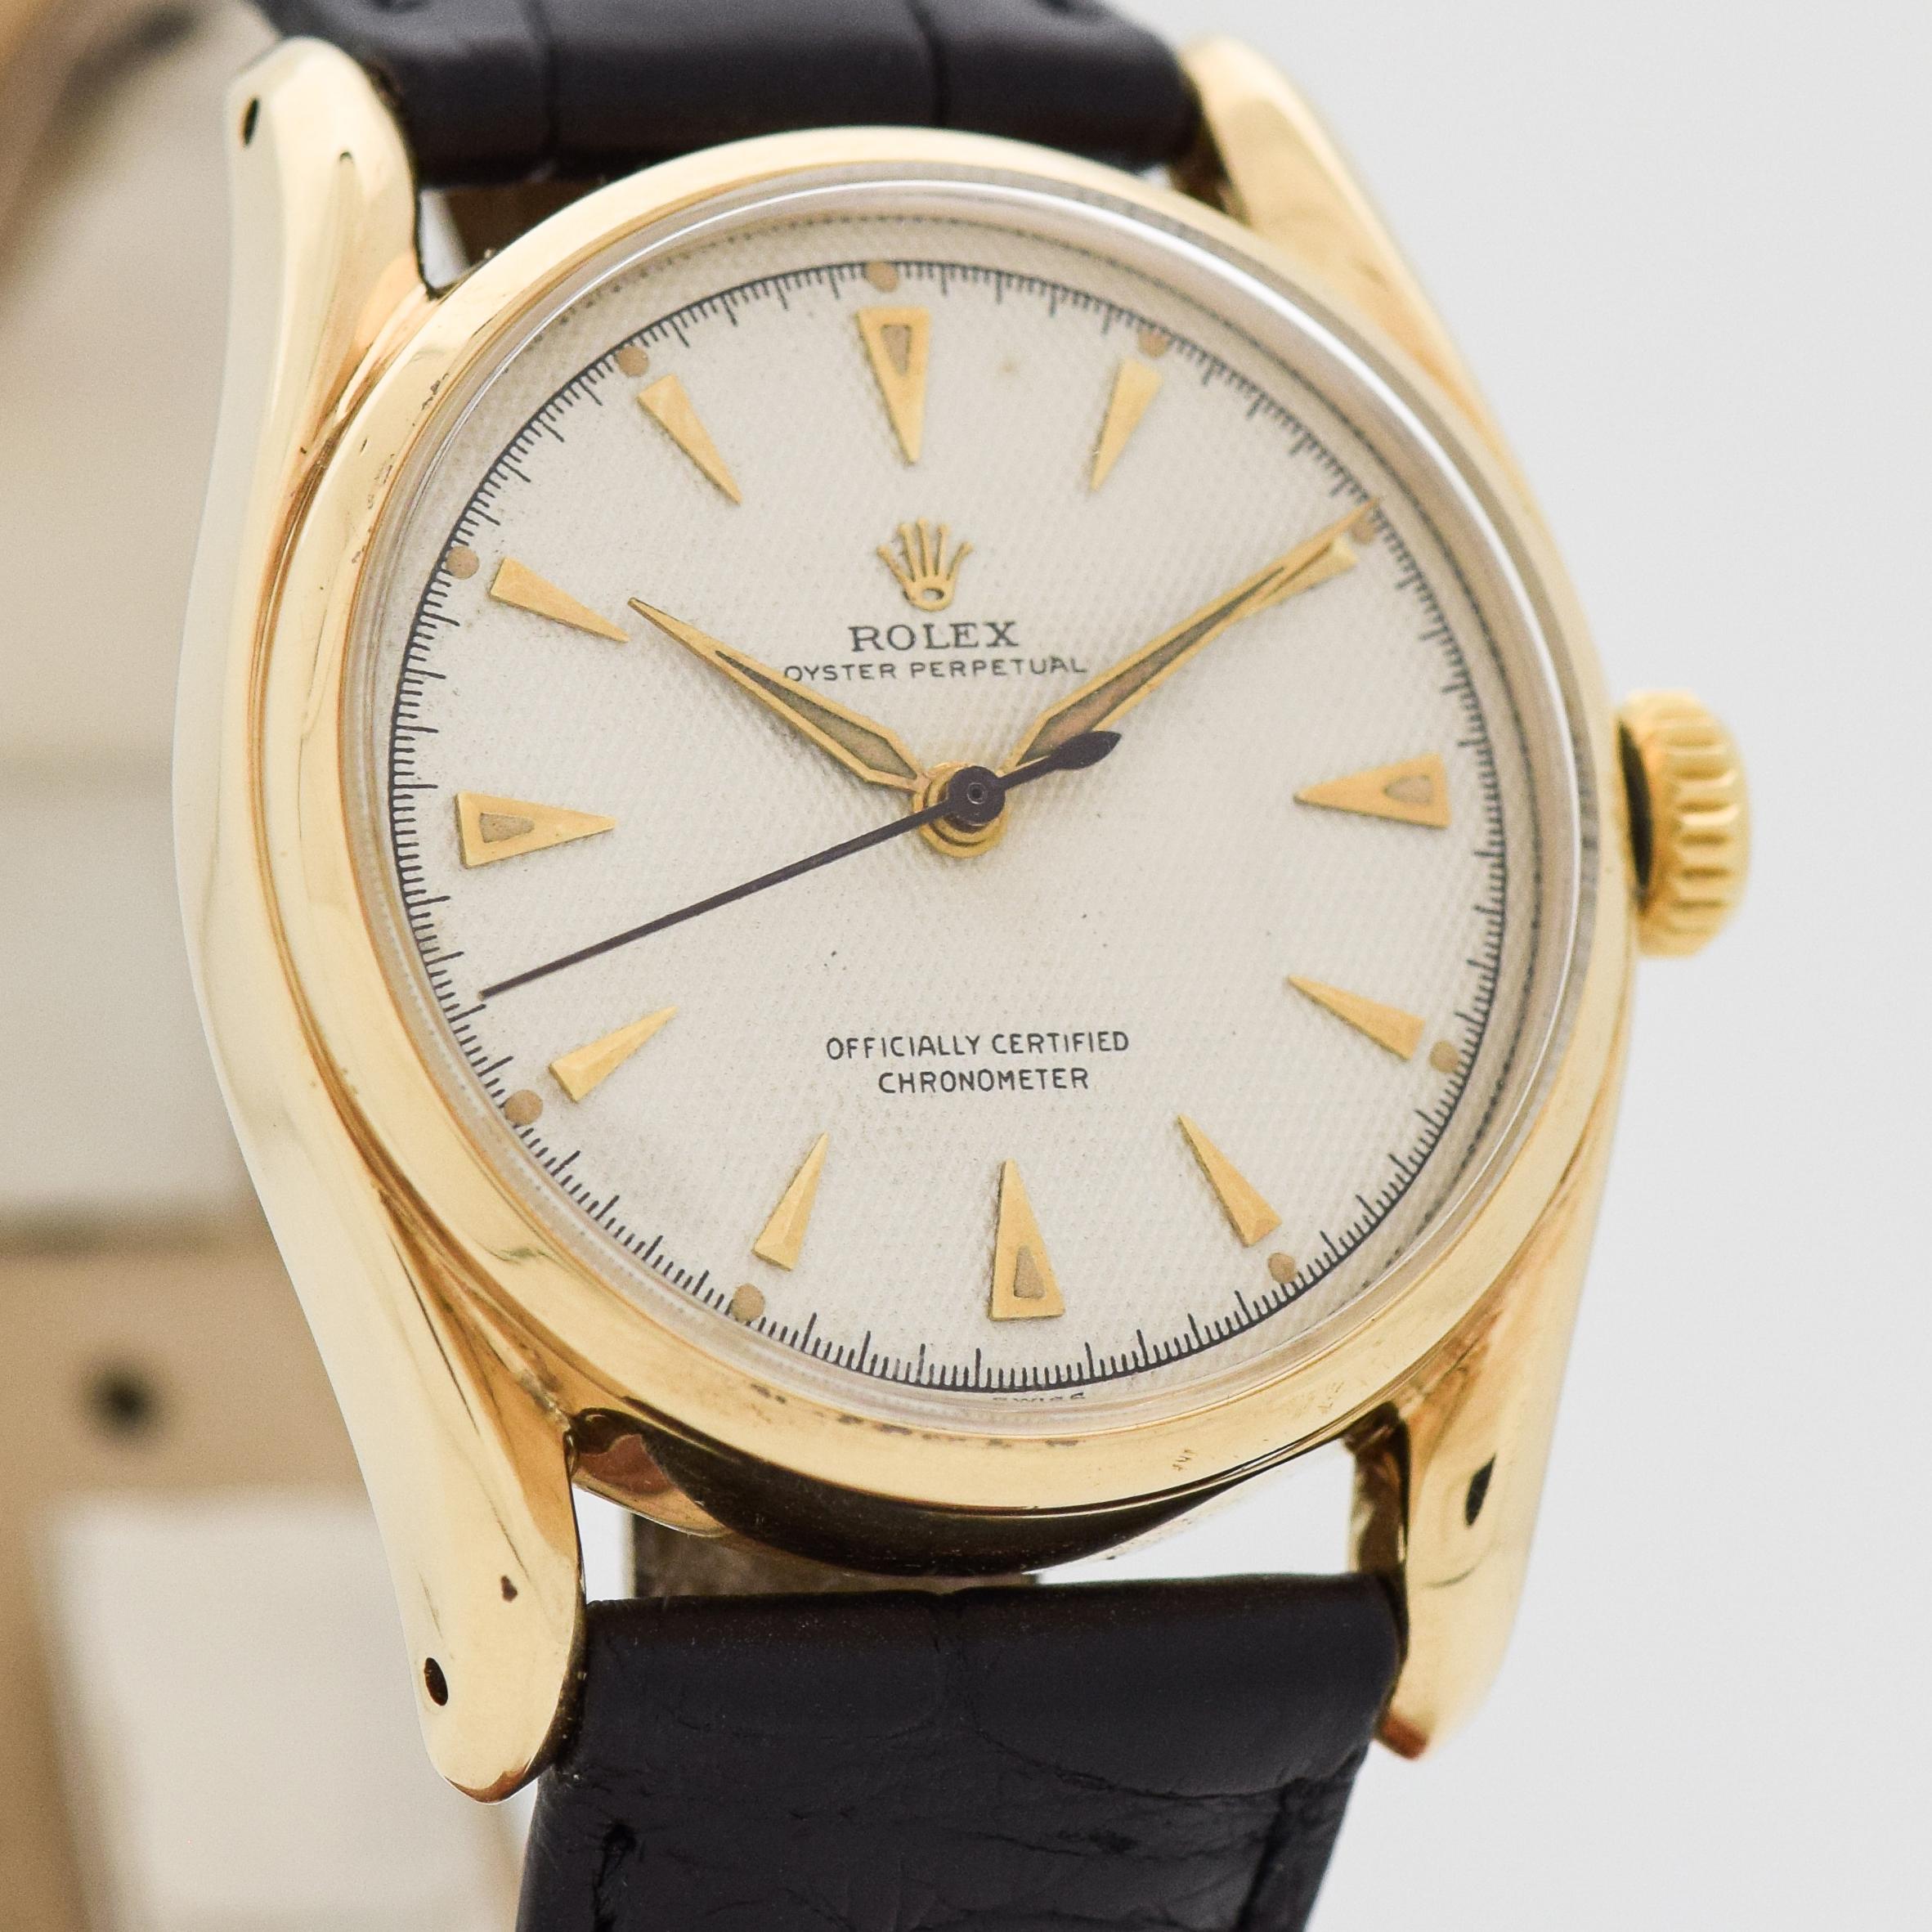 1955 Vintage Rolex Bombe Ref. 6018 14k Yellow Gold watch with Original Waffle Textured Silver Dial with Applied Gold Beveled Elongated Triangle Markers with Rare Copper Gilt Movement. 34mm x 40mm lug to lug (1.34 in. x 1.57 in.) - 17 jewel,